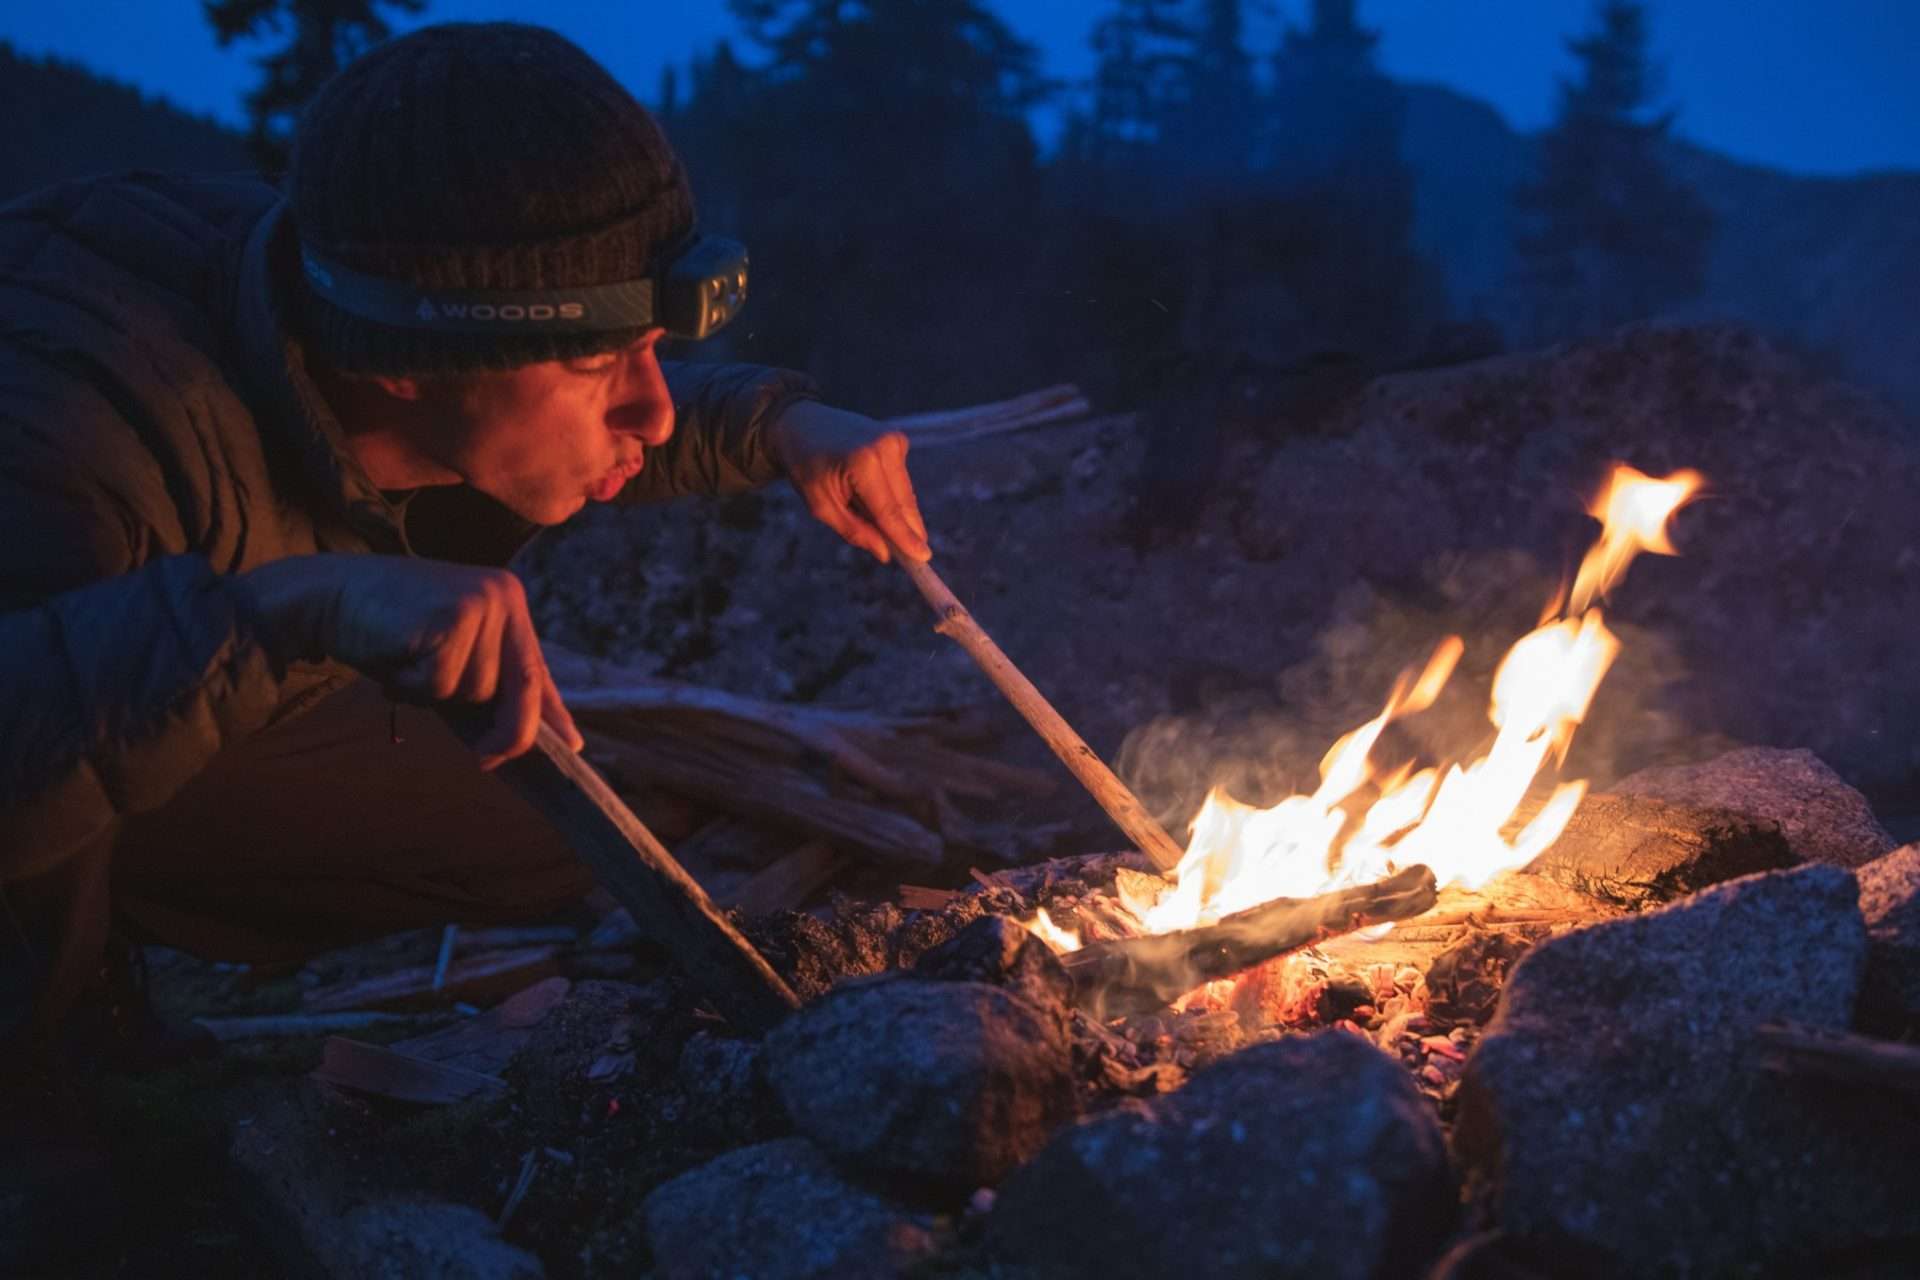 Man building a fire in the wilderness.